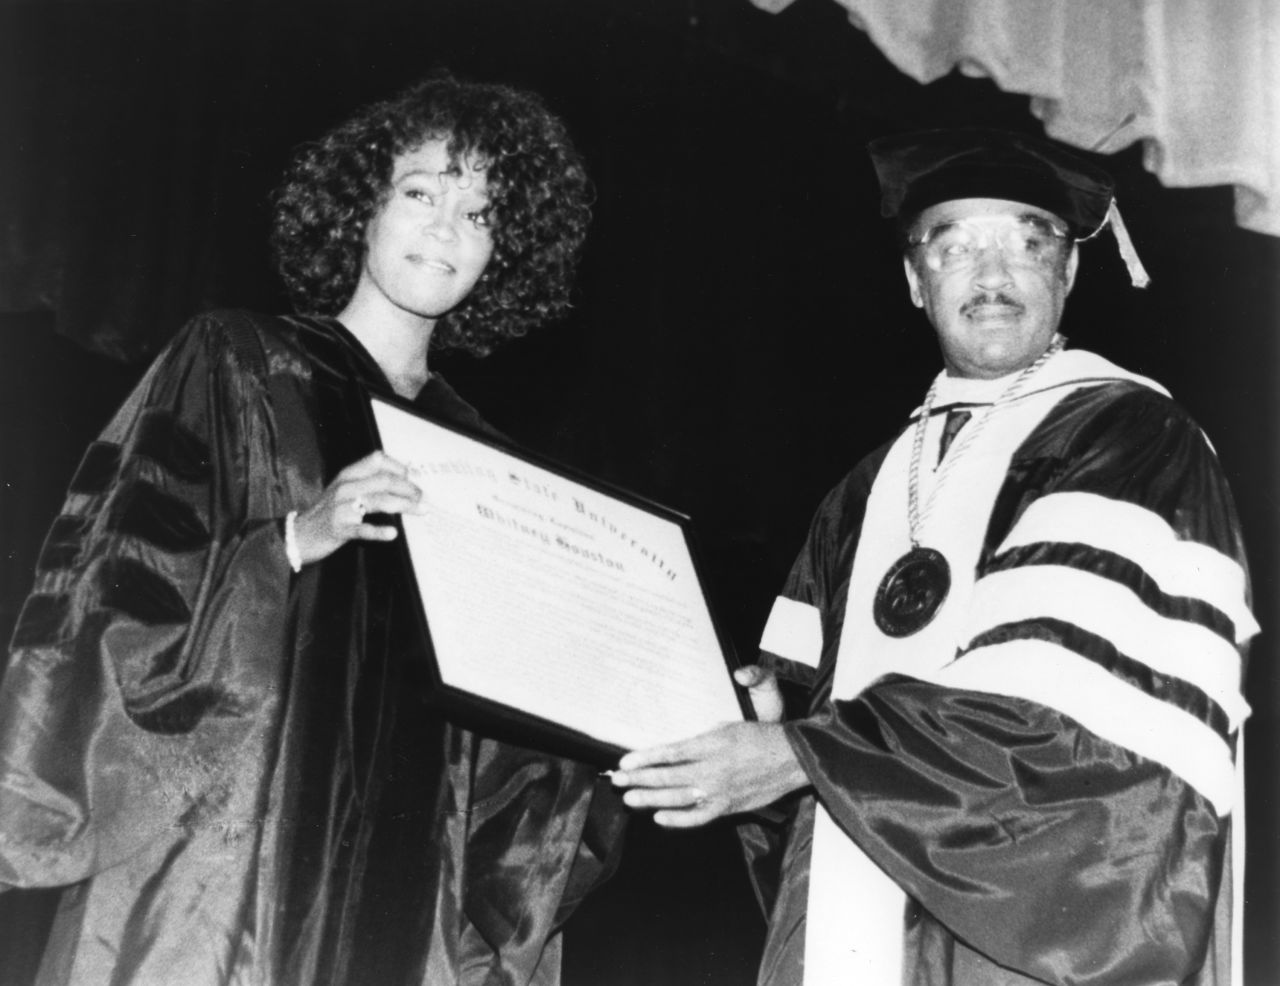 Whitney Houston receives an Honorary Doctorate of Humane Letters from Joseph B. Johnson, the president of Grambling University, in Louisiana, on July 21, 1988.